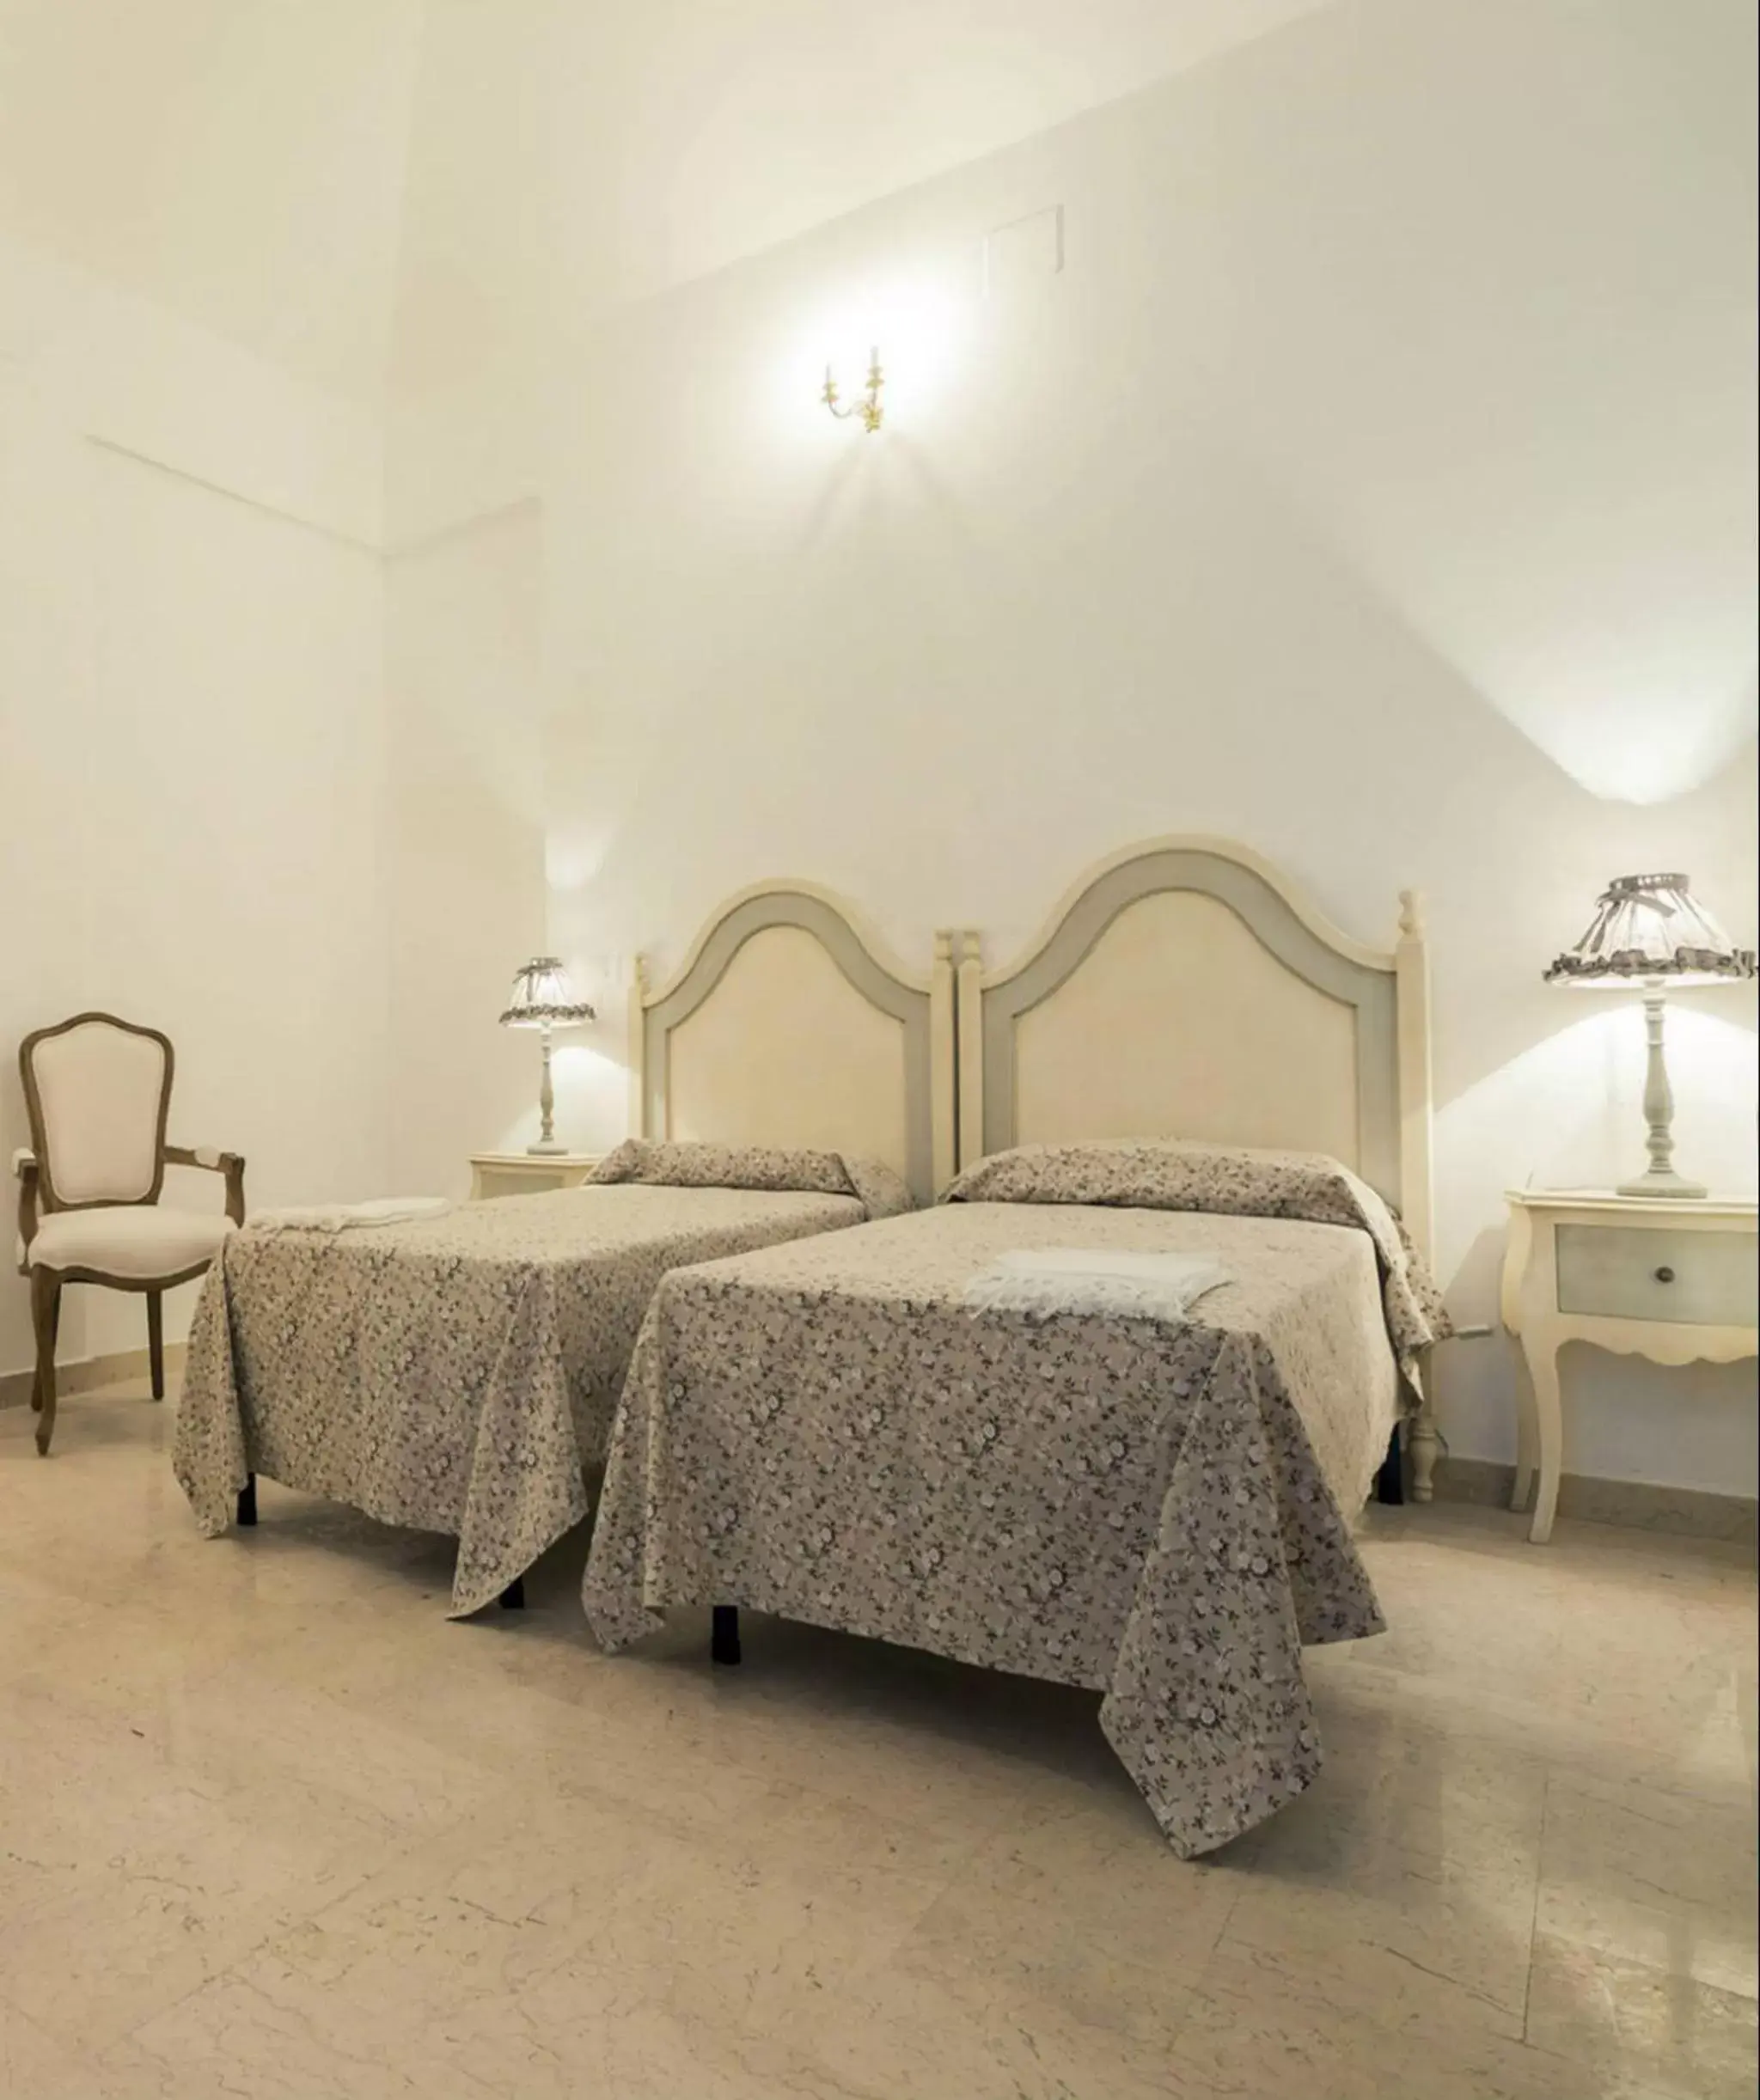 Nearby landmark, Bed in Palazzo Cavoti